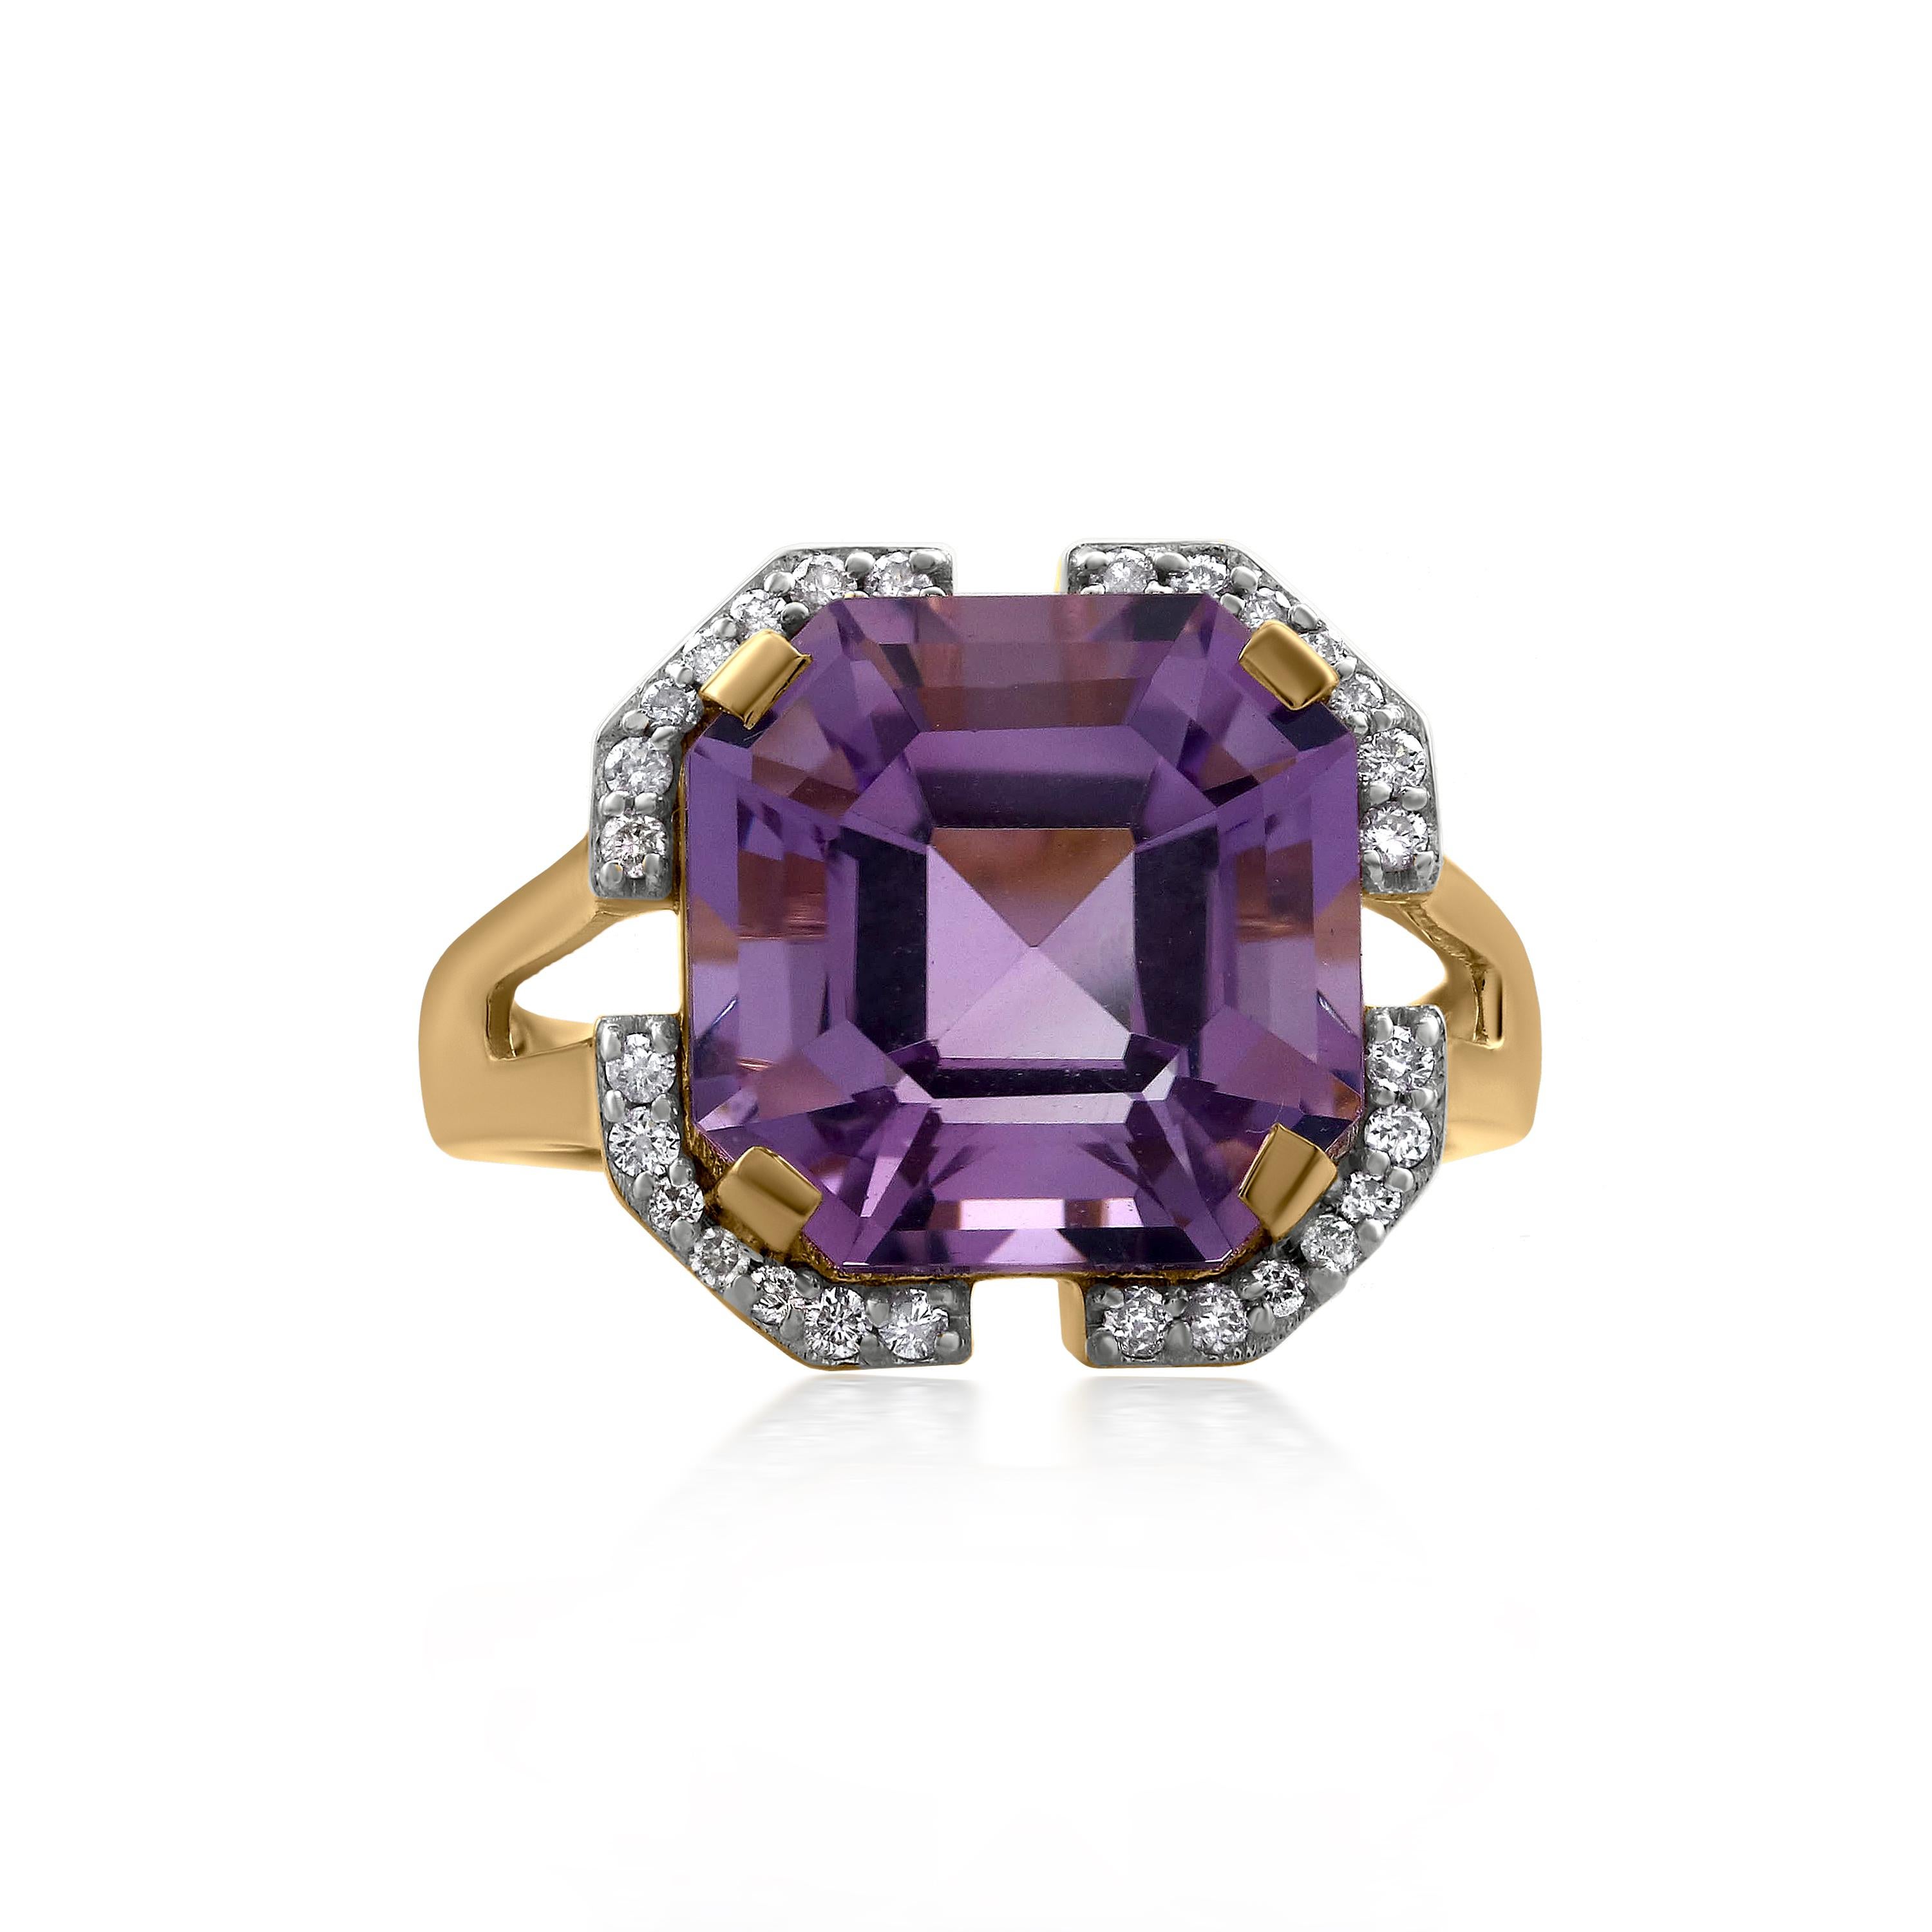 Soft purple yet luminous. This Gemistry solitaire ring features in the center an 7.6 carat asscher cut, octagon amethyst, prong set on an openwork gallery of polished 14k yellow gold with tapered shank. The corners of the center stone are further